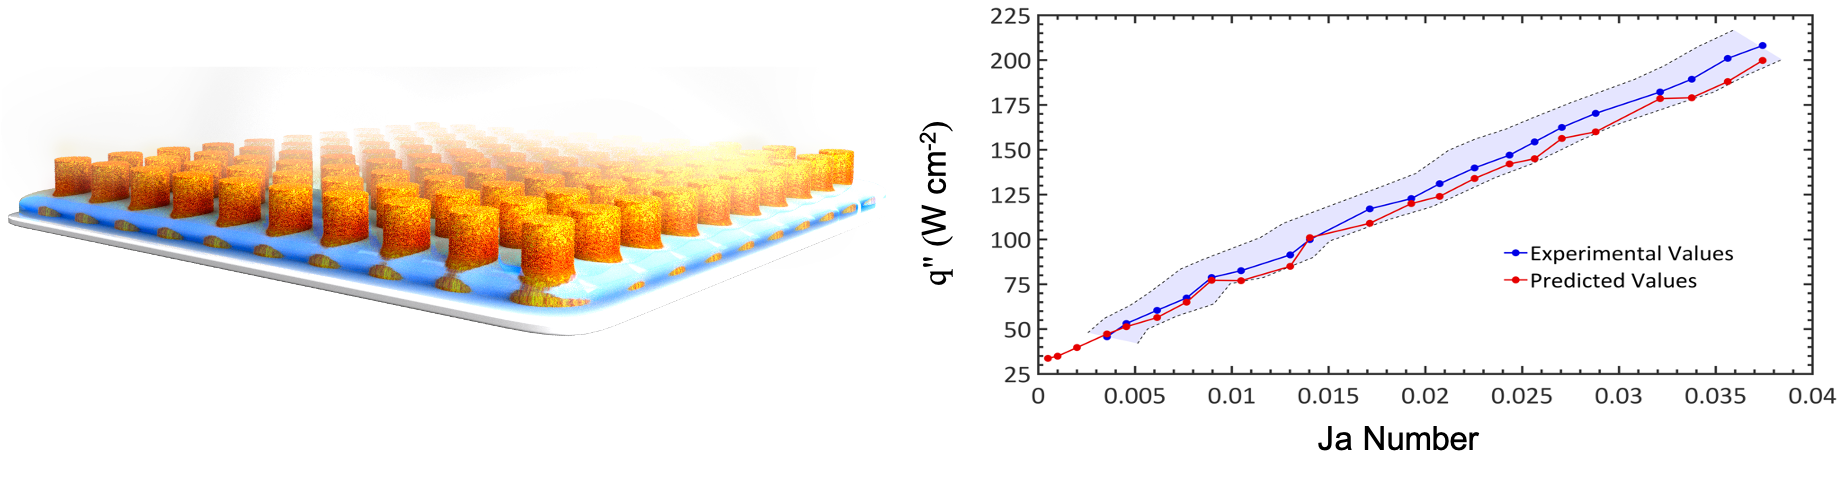 Predictive AI platform on thin film evaporation in hierarchical structures